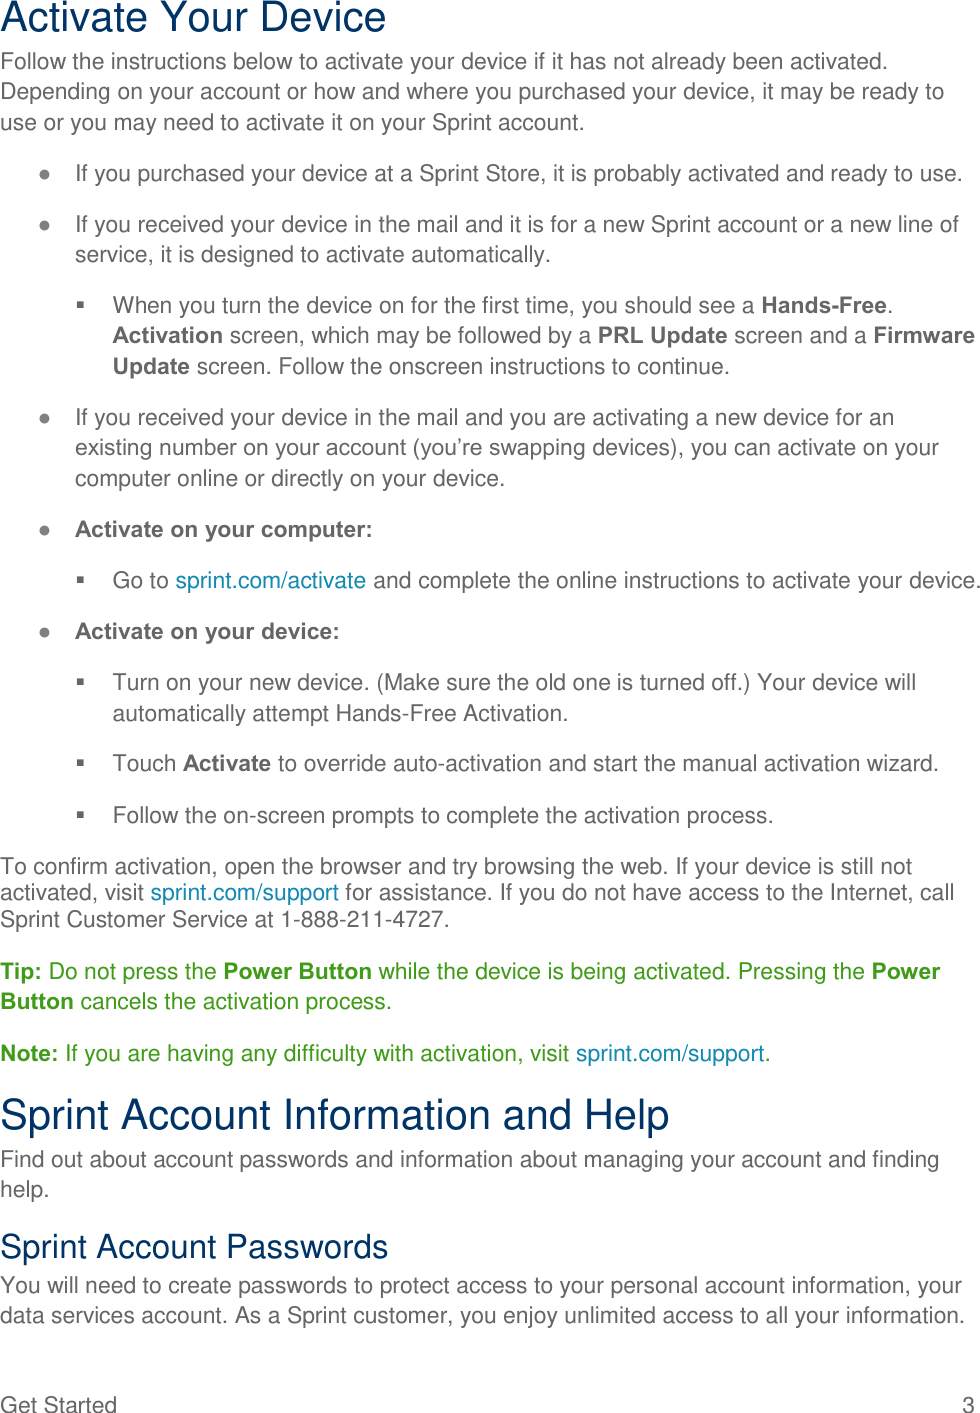  Get Started  3 Activate Your Device Follow the instructions below to activate your device if it has not already been activated. Depending on your account or how and where you purchased your device, it may be ready to use or you may need to activate it on your Sprint account. ● If you purchased your device at a Sprint Store, it is probably activated and ready to use. ● If you received your device in the mail and it is for a new Sprint account or a new line of service, it is designed to activate automatically.   When you turn the device on for the first time, you should see a Hands-Free. Activation screen, which may be followed by a PRL Update screen and a Firmware Update screen. Follow the onscreen instructions to continue. ● If you received your device in the mail and you are activating a new device for an existing number on your account (you’re swapping devices), you can activate on your computer online or directly on your device. ● Activate on your computer:   Go to sprint.com/activate and complete the online instructions to activate your device. ● Activate on your device:   Turn on your new device. (Make sure the old one is turned off.) Your device will automatically attempt Hands-Free Activation.   Touch Activate to override auto-activation and start the manual activation wizard.   Follow the on-screen prompts to complete the activation process. To confirm activation, open the browser and try browsing the web. If your device is still not activated, visit sprint.com/support for assistance. If you do not have access to the Internet, call Sprint Customer Service at 1-888-211-4727.     Tip: Do not press the Power Button while the device is being activated. Pressing the Power Button cancels the activation process. Note: If you are having any difficulty with activation, visit sprint.com/support. Sprint Account Information and Help Find out about account passwords and information about managing your account and finding help. Sprint Account Passwords You will need to create passwords to protect access to your personal account information, your data services account. As a Sprint customer, you enjoy unlimited access to all your information. 